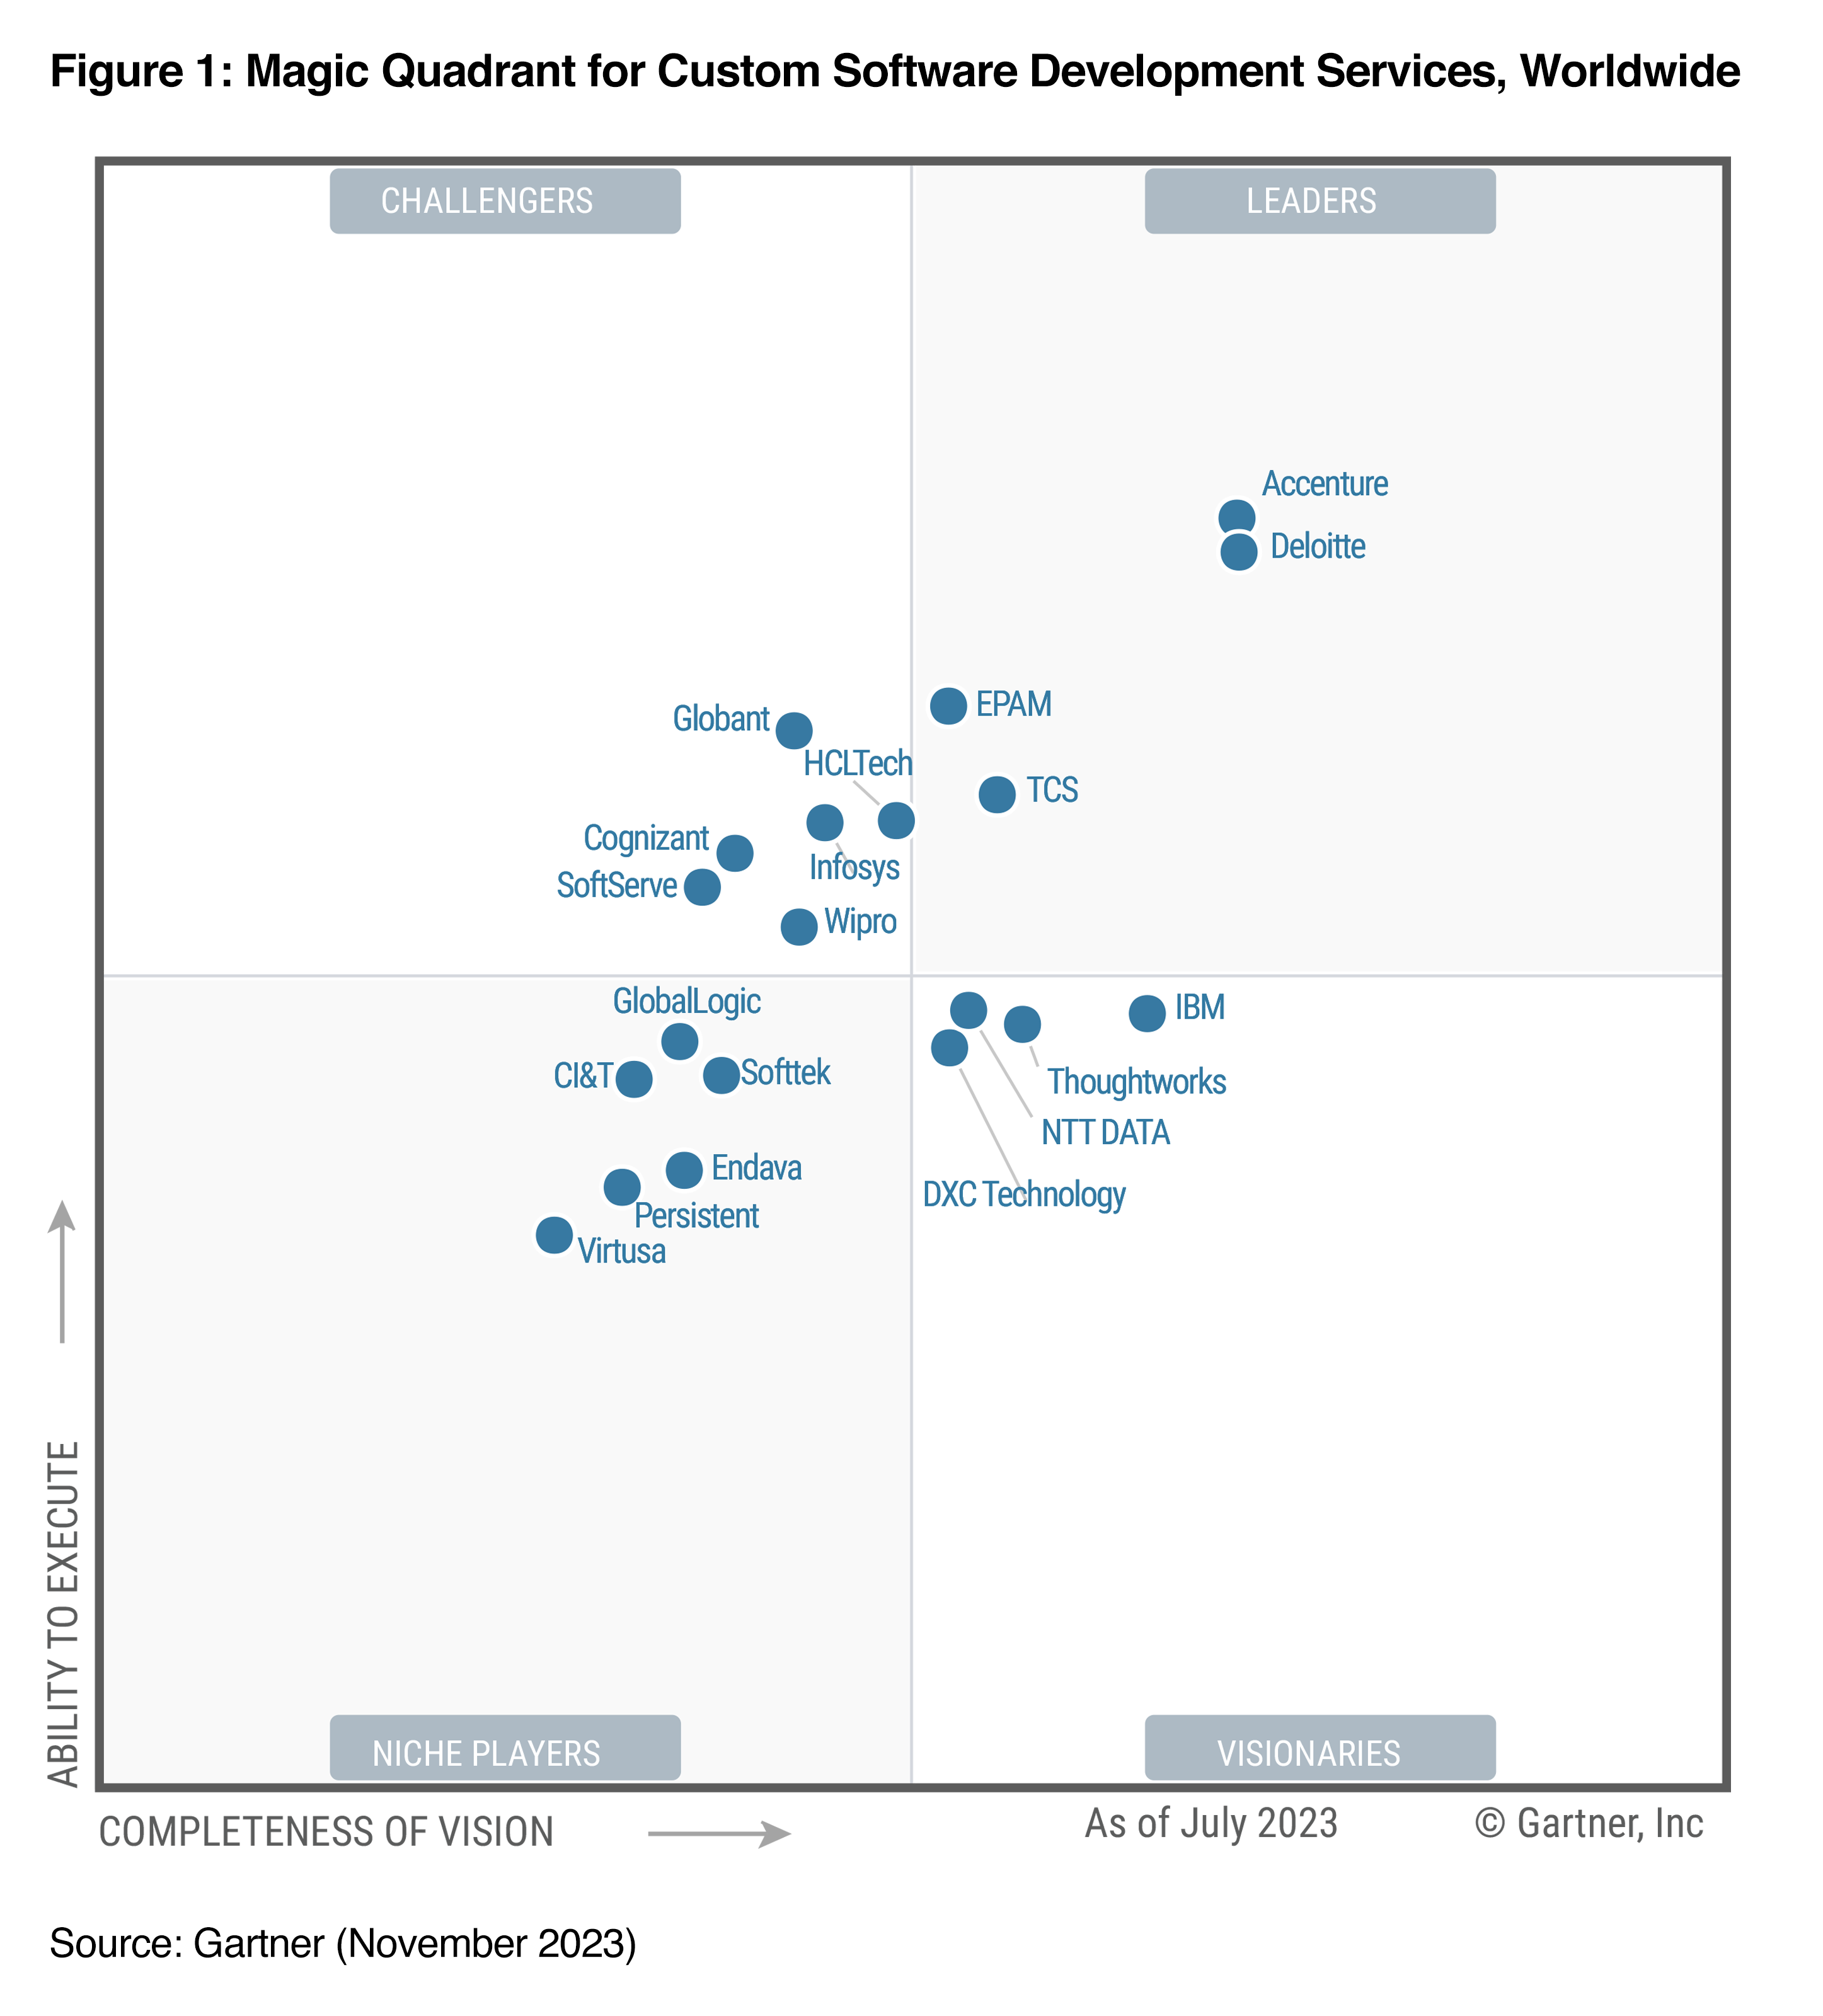 image of the gartner magic quadrant showing Thoughtworks in the Visionary quadrant